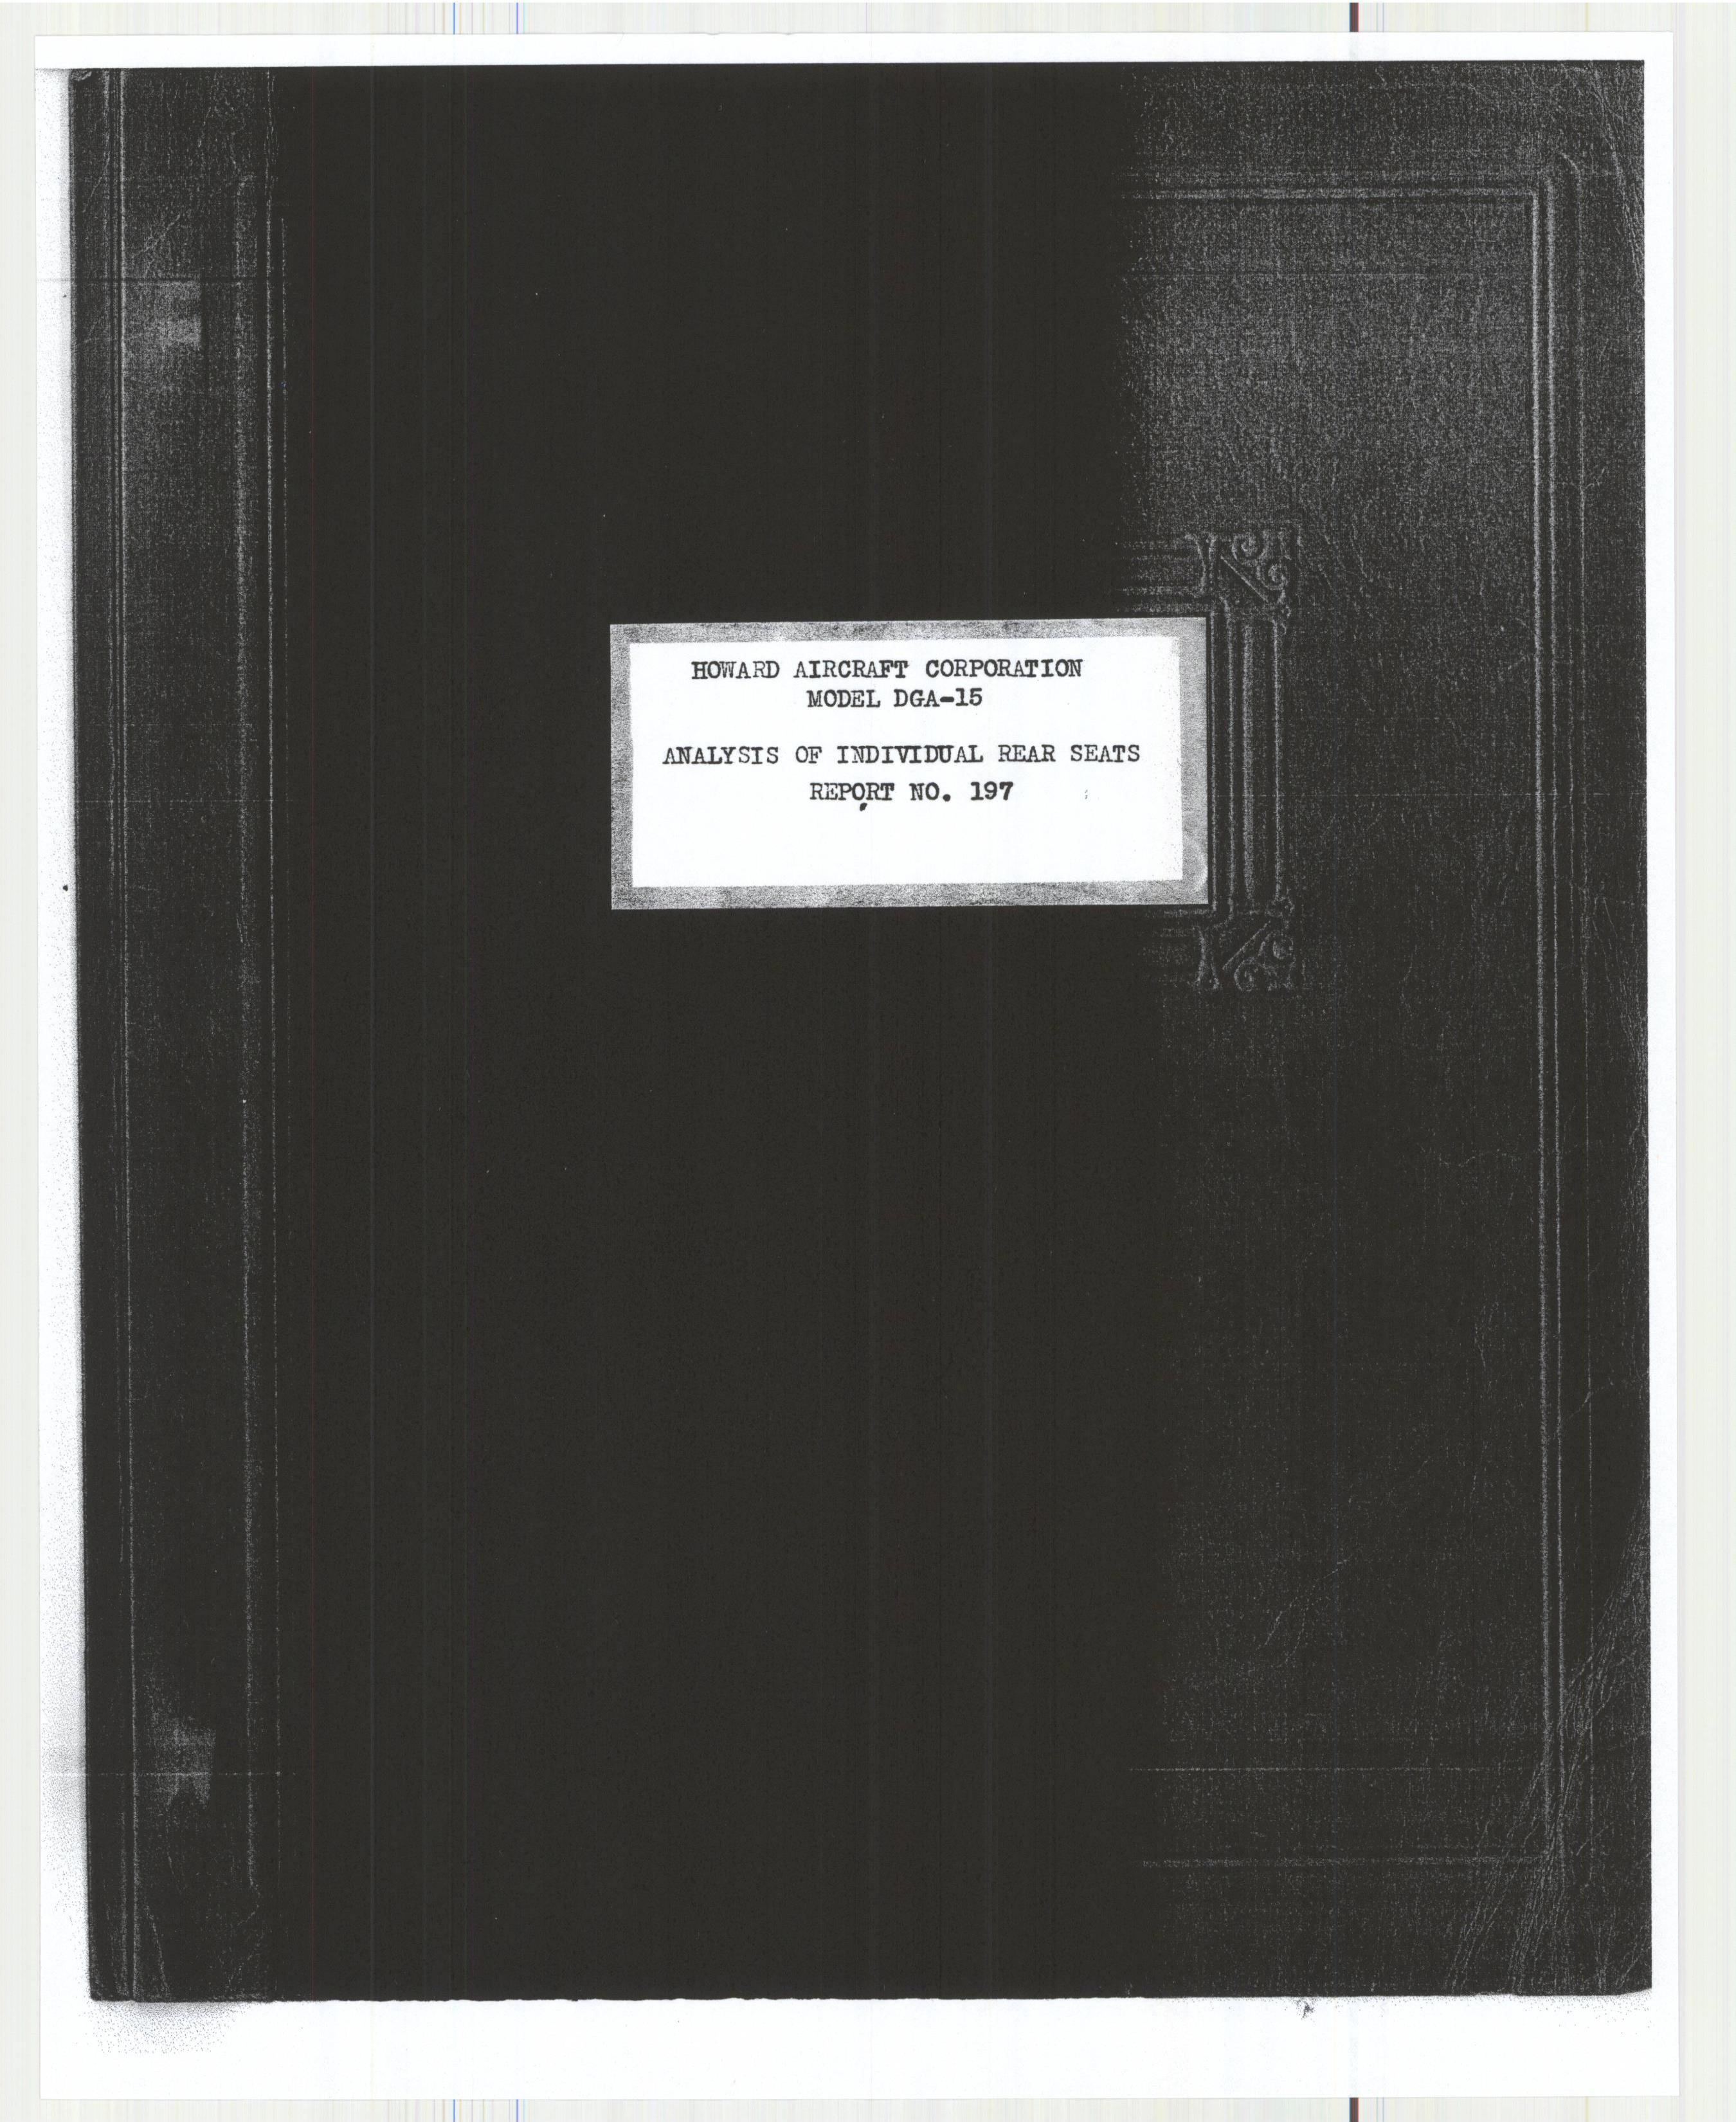 Sample page 1 from AirCorps Library document: Report 197, Analysis of Individual Rear Seats, DGA-15